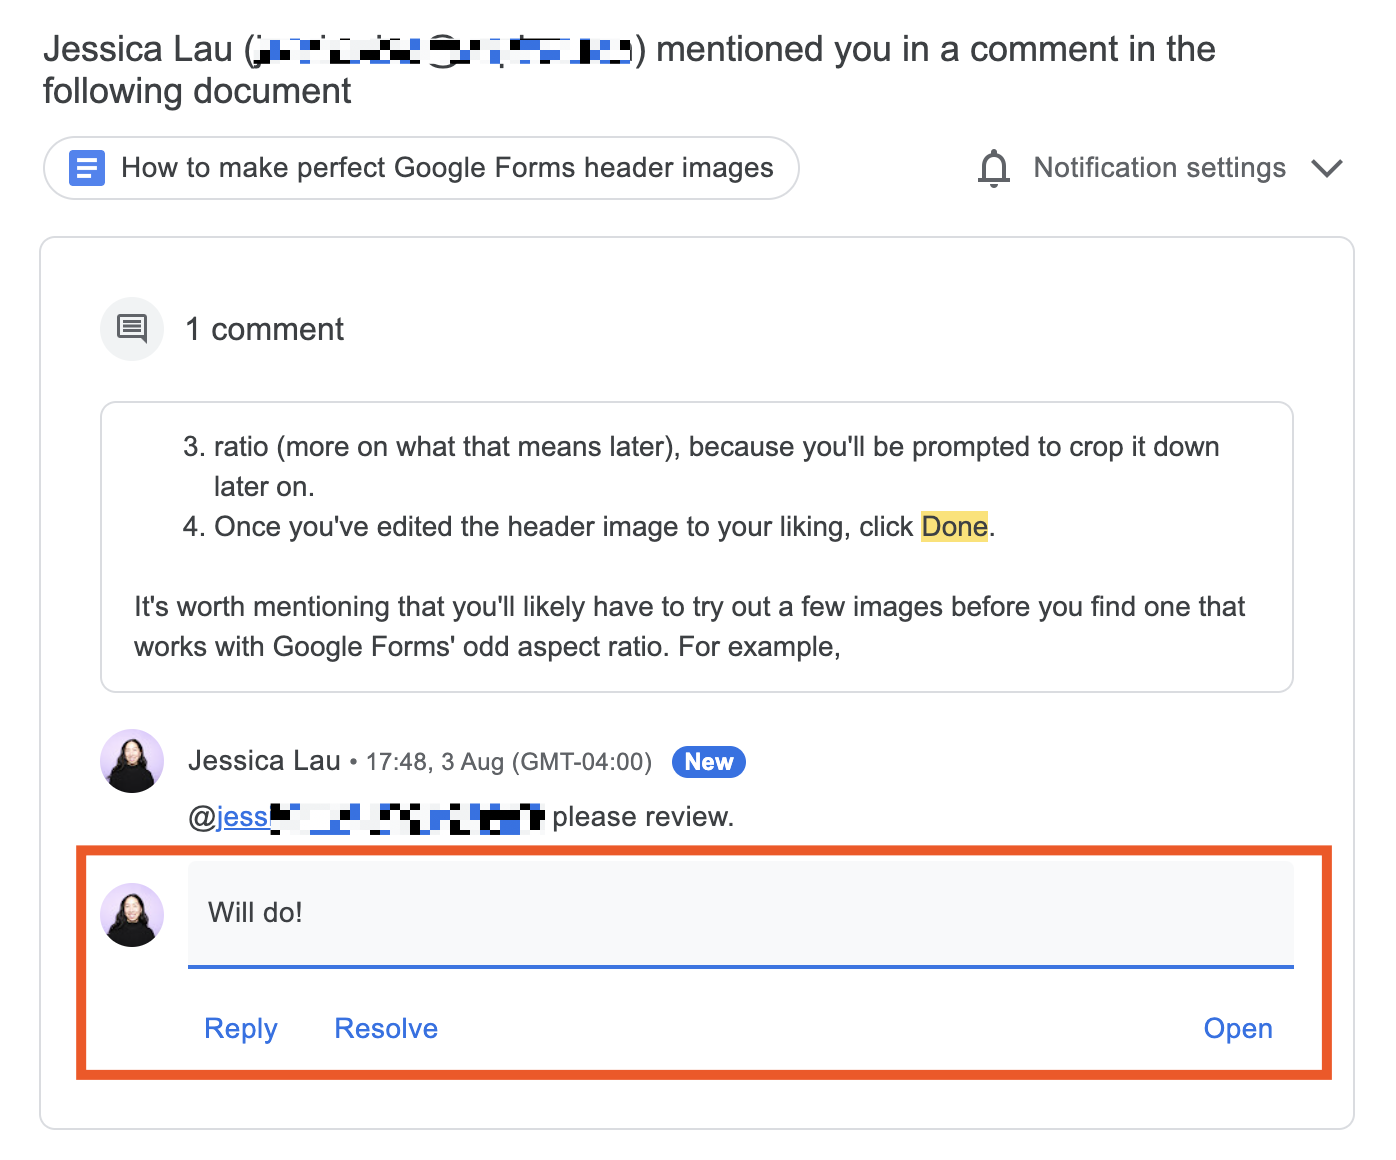 Email notification from Google Docs with a preview of a comment thread. There are options to reply directly to the comment, resolve it, or open the comment. 